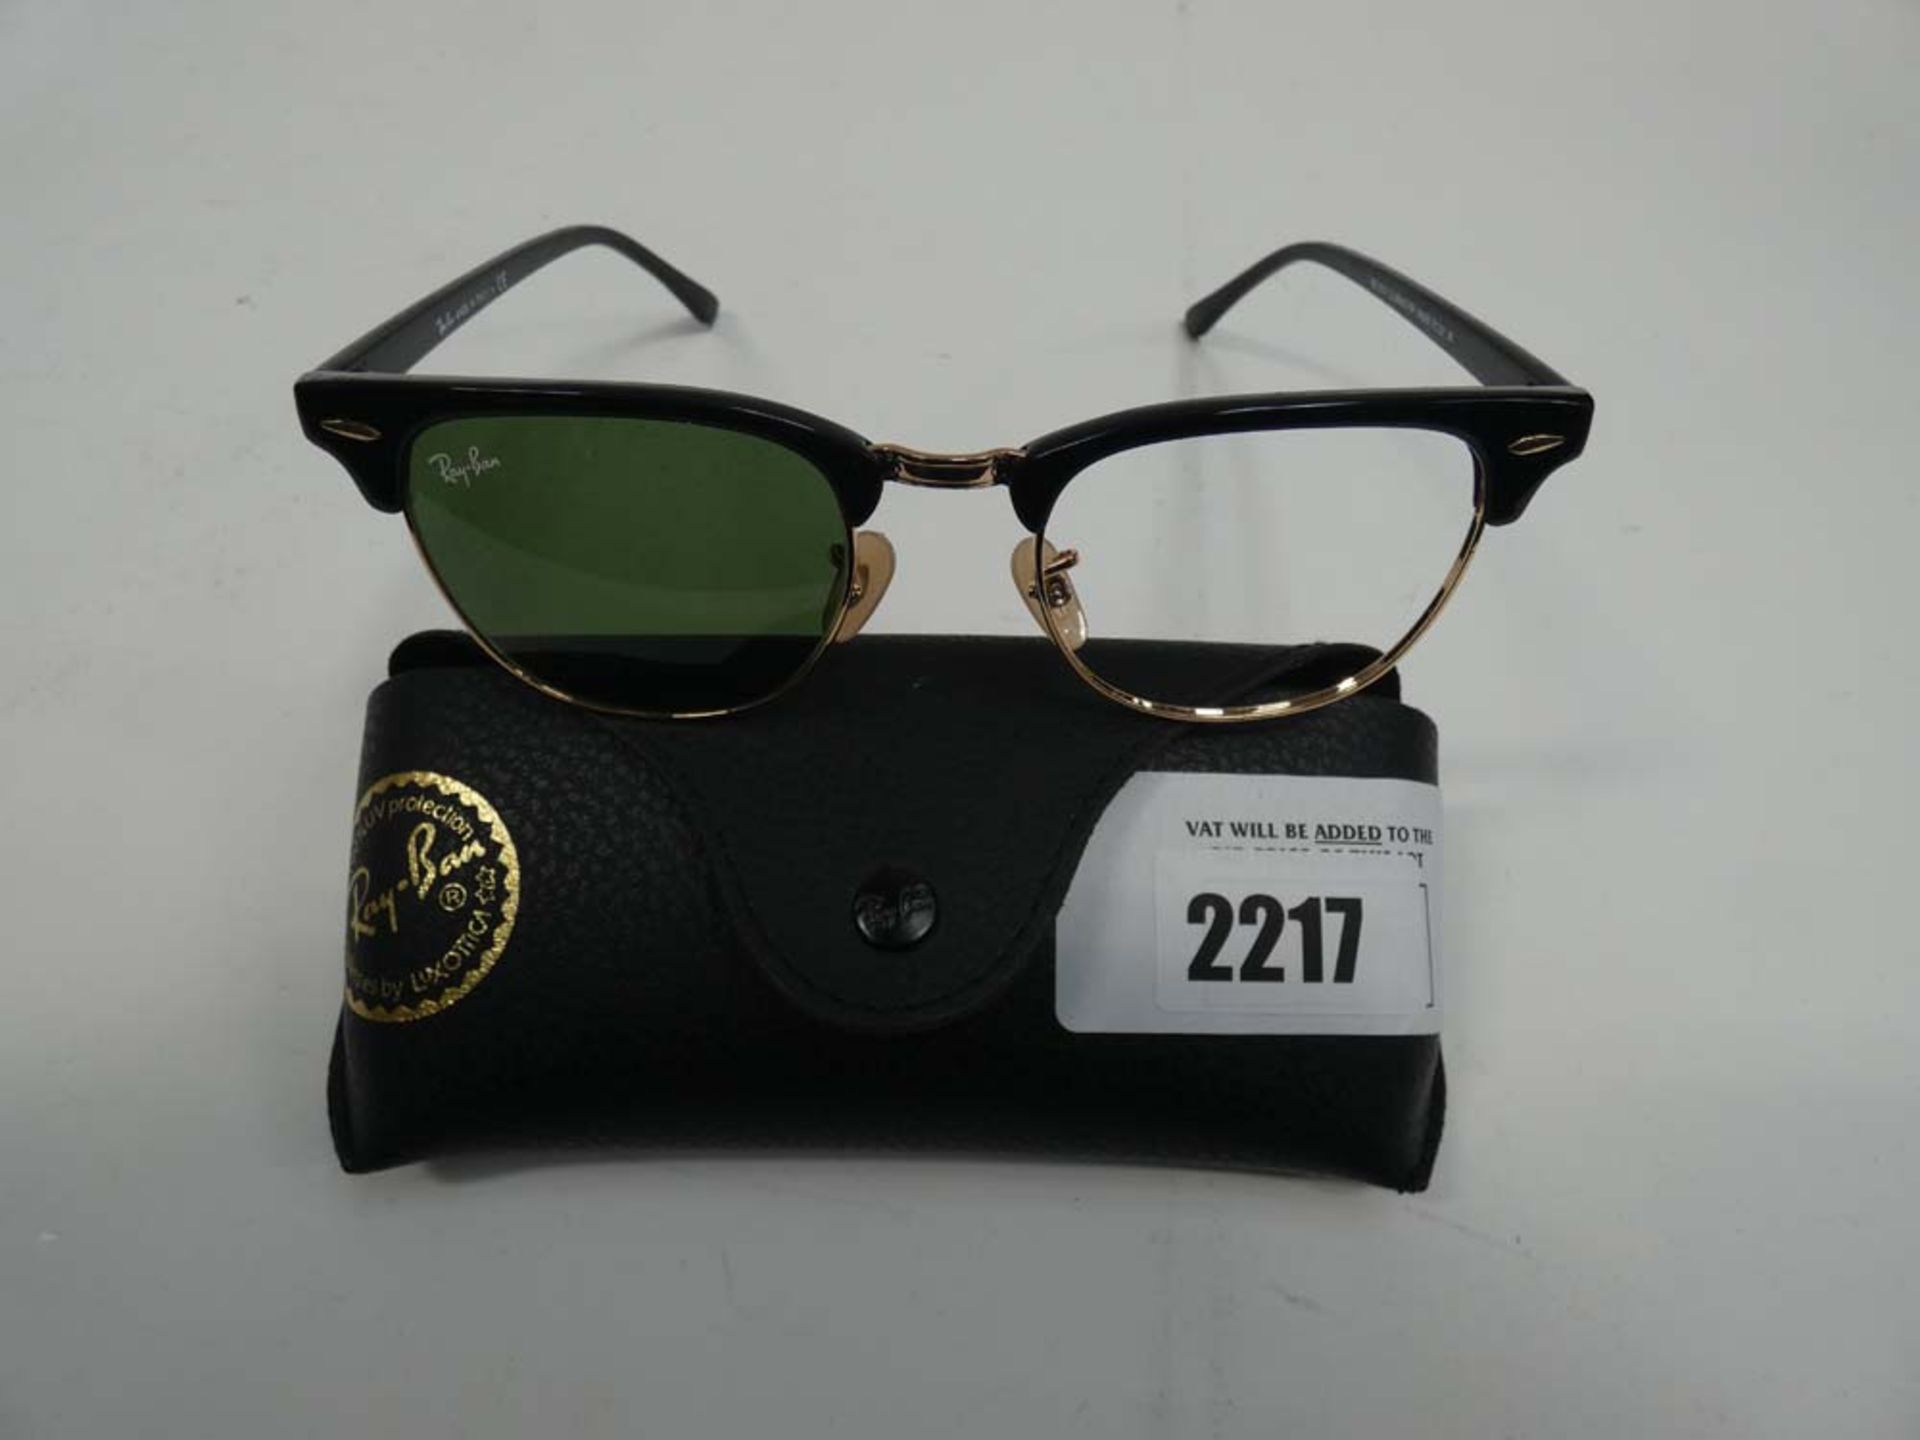 Ray-Ban RB3016 sunglasses (a/f left lense missing)